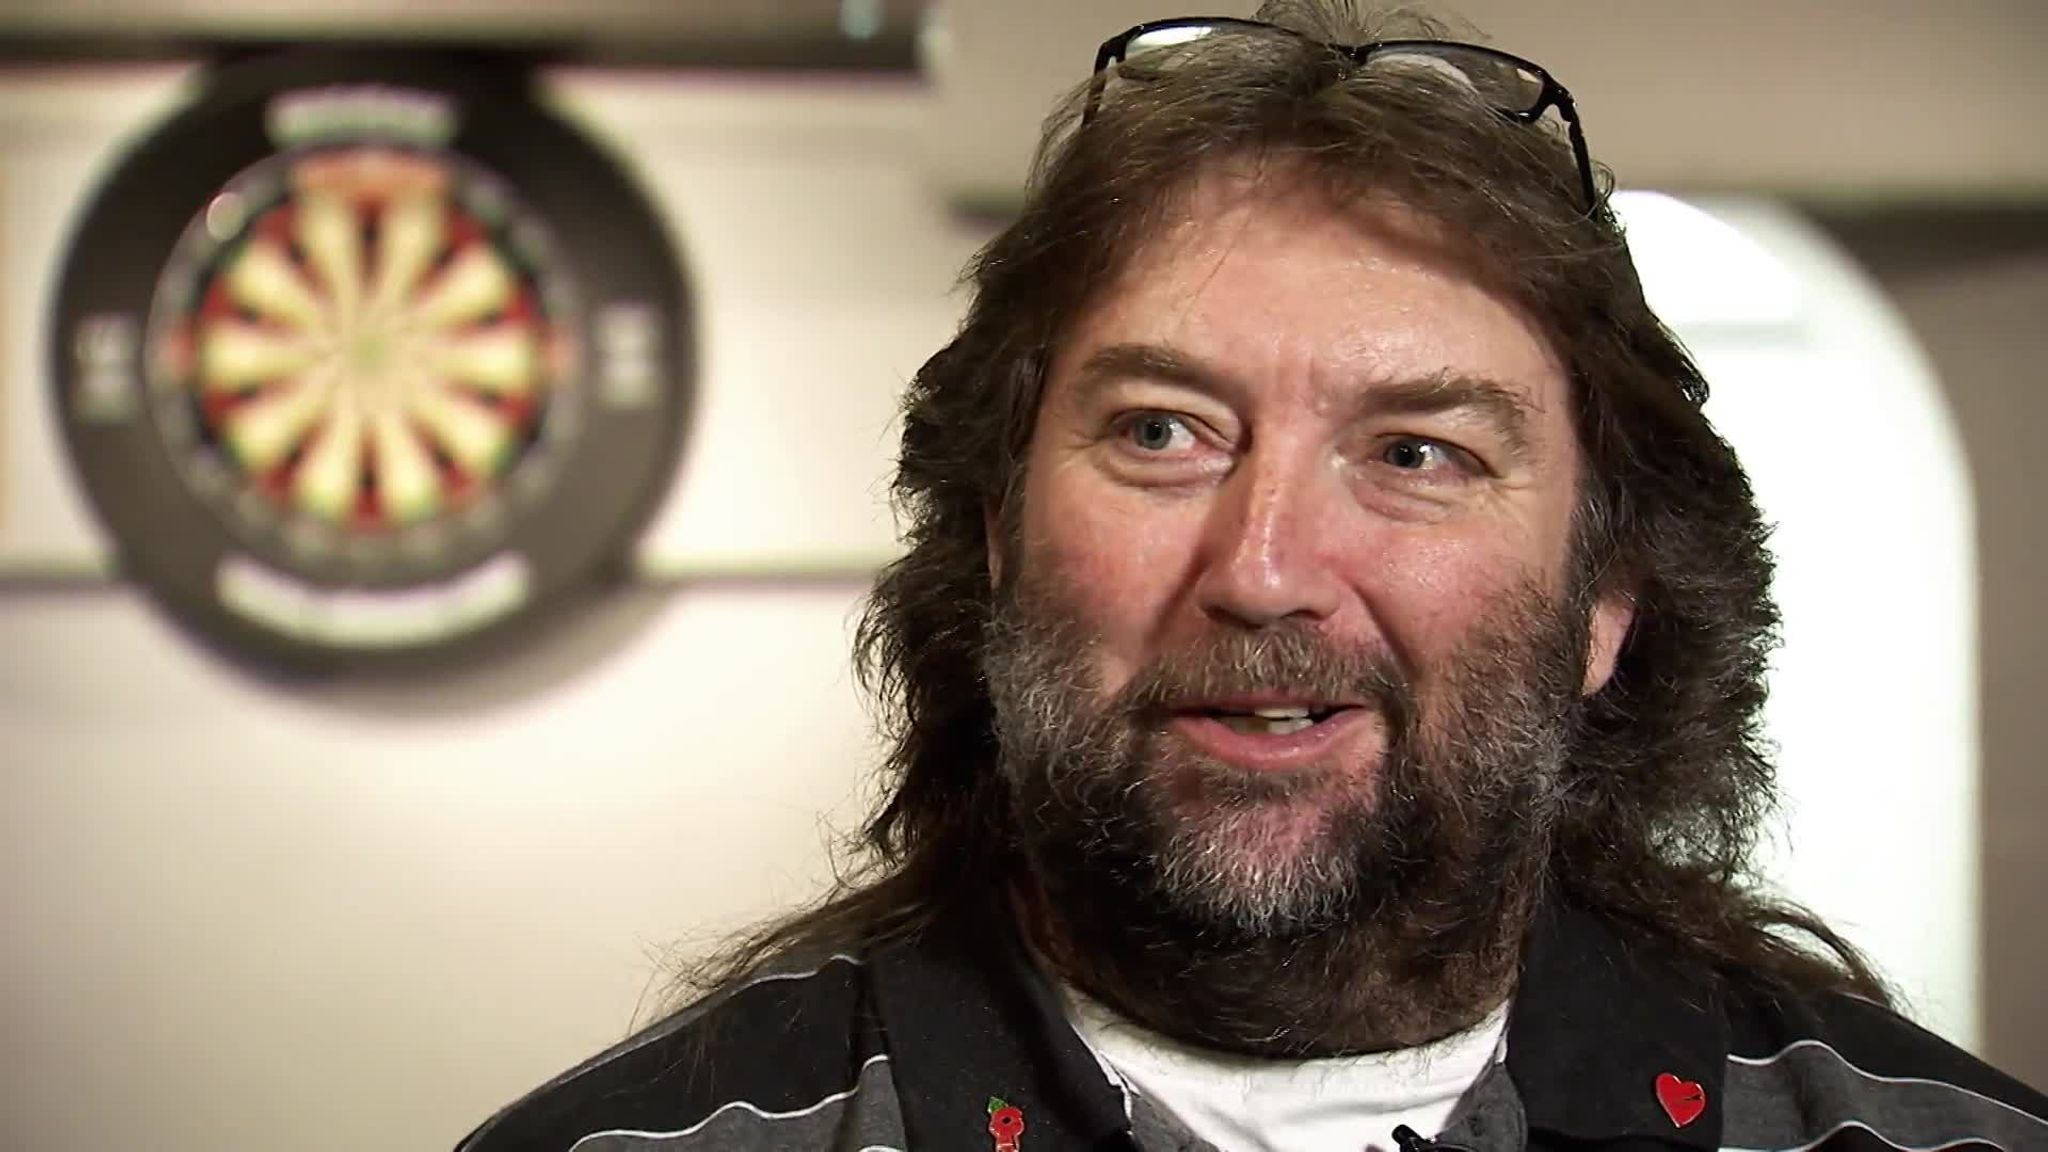 Andy Fordham: Former world champion known 'The Viking' dies aged 59 | UK | Sky News